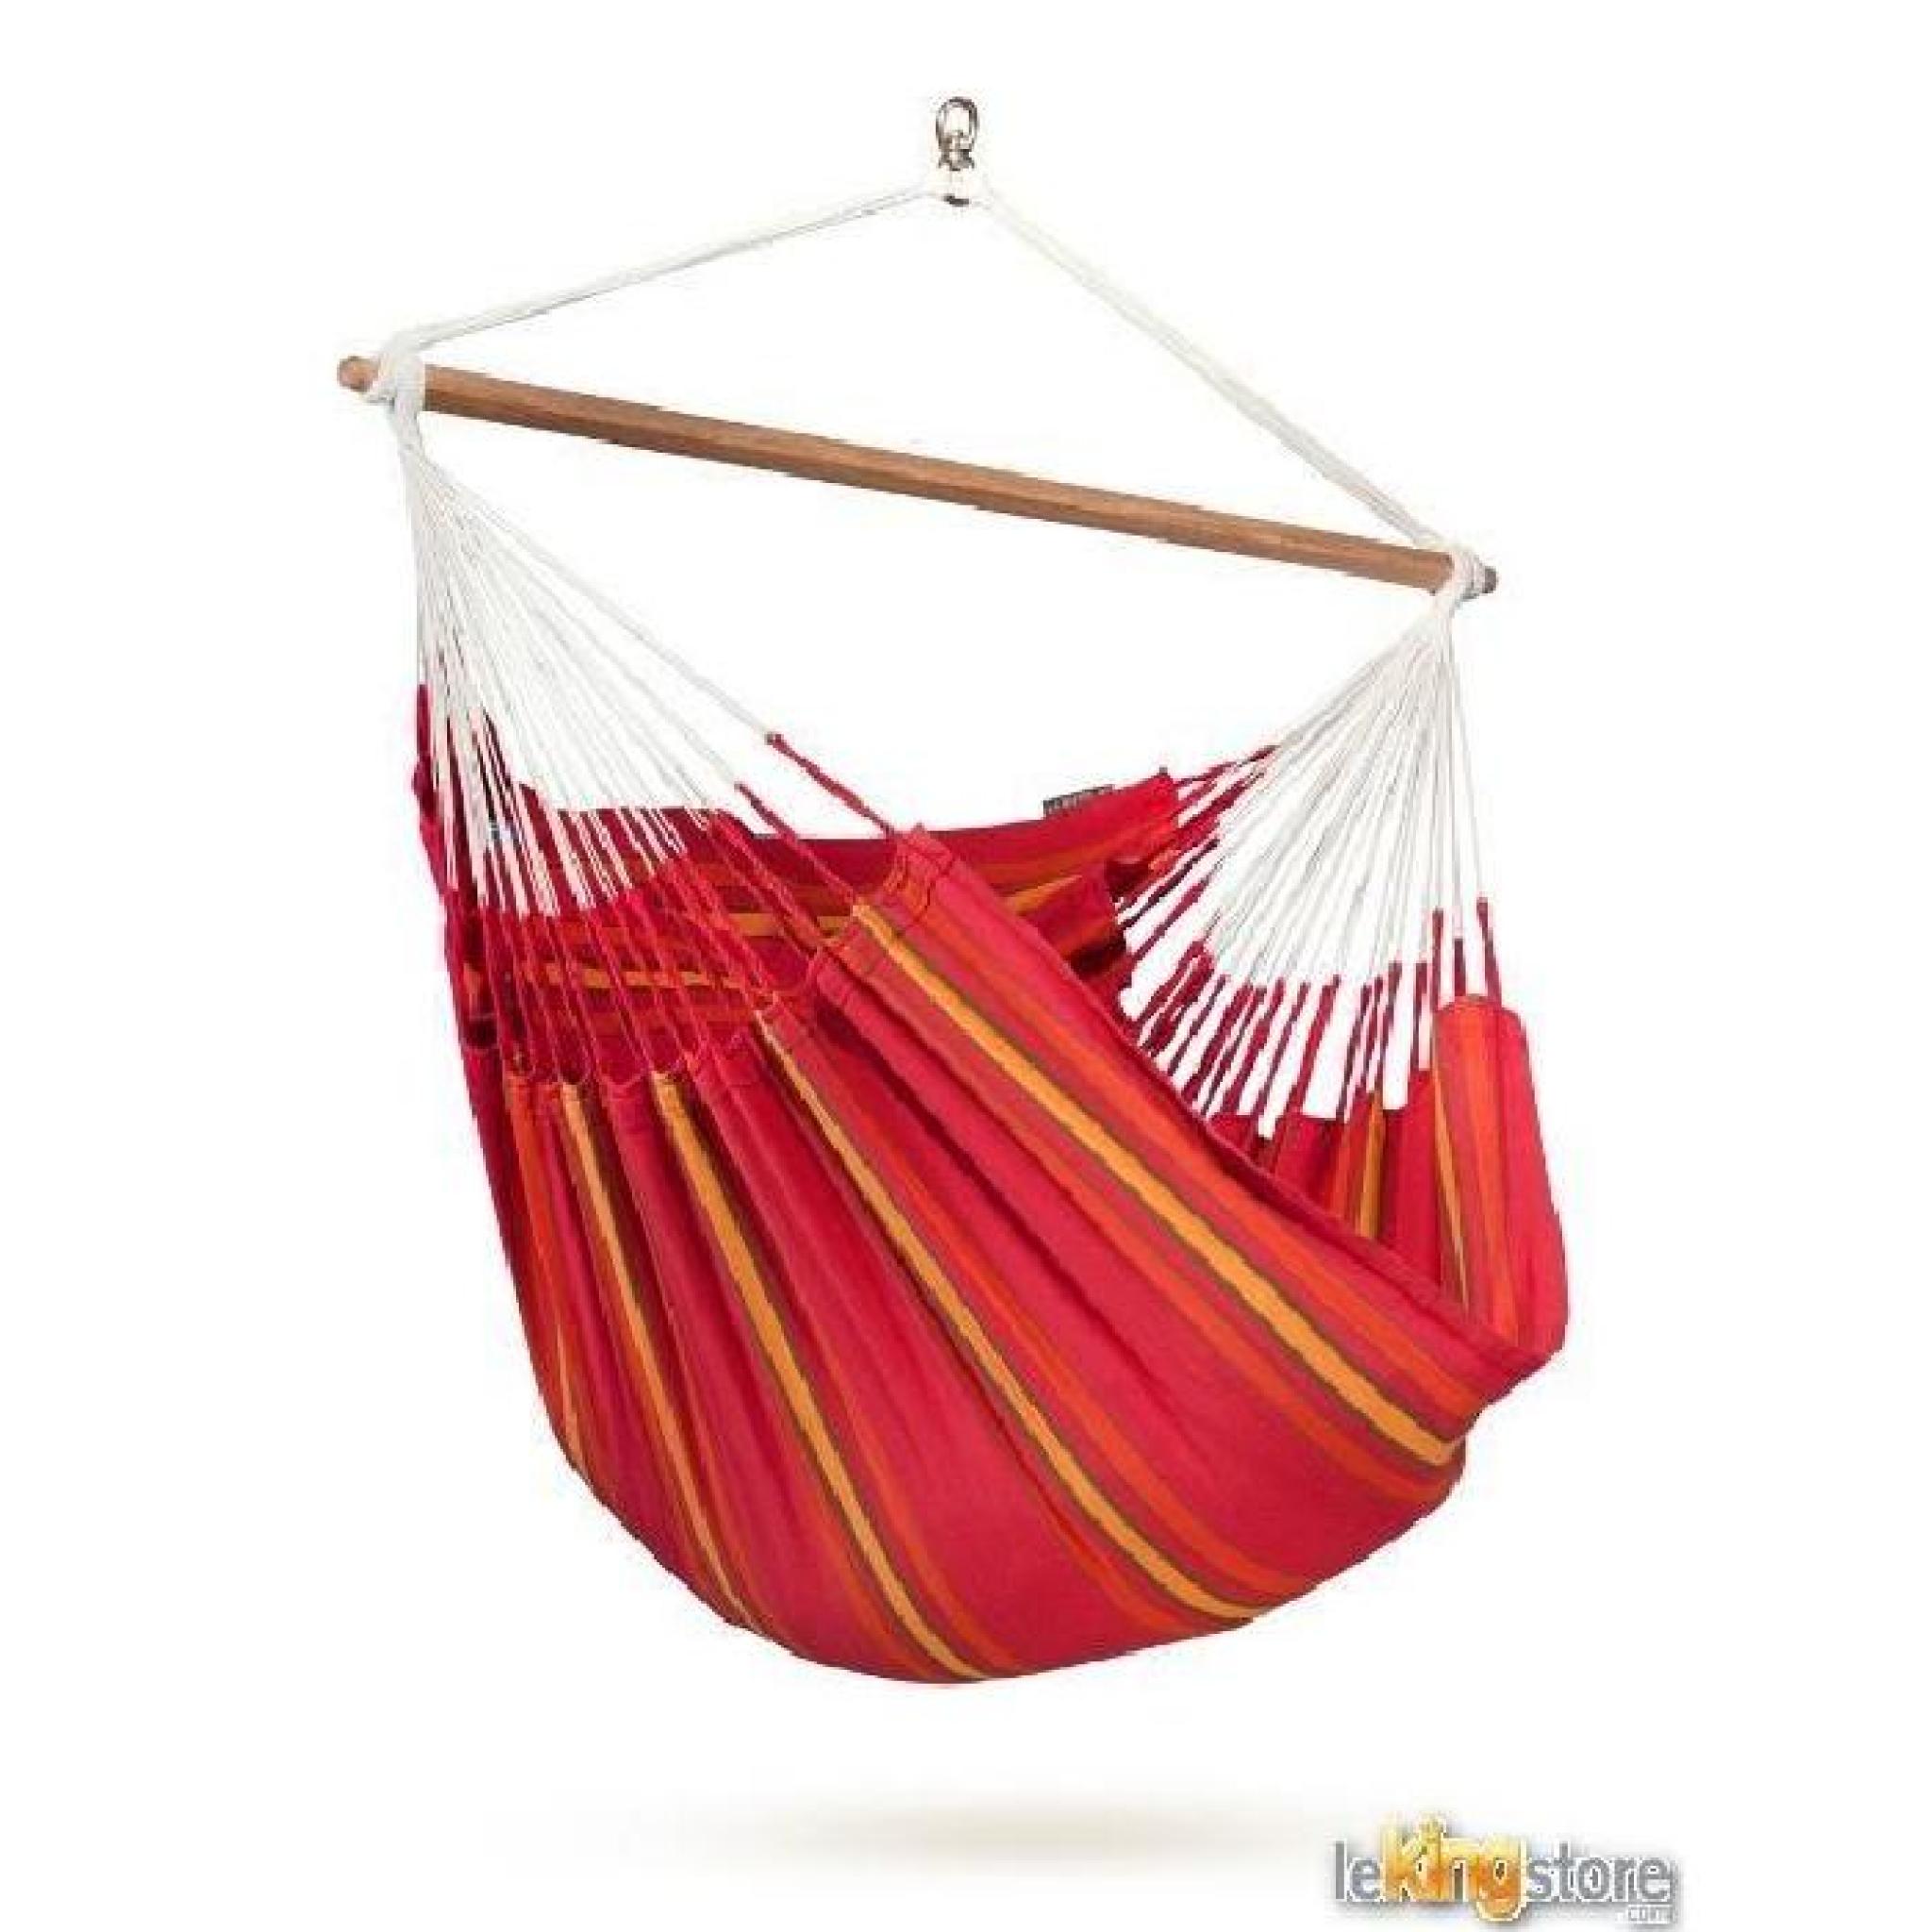 Hamac Chaise Lounger CURRAMBERA Coloris Rouge S...